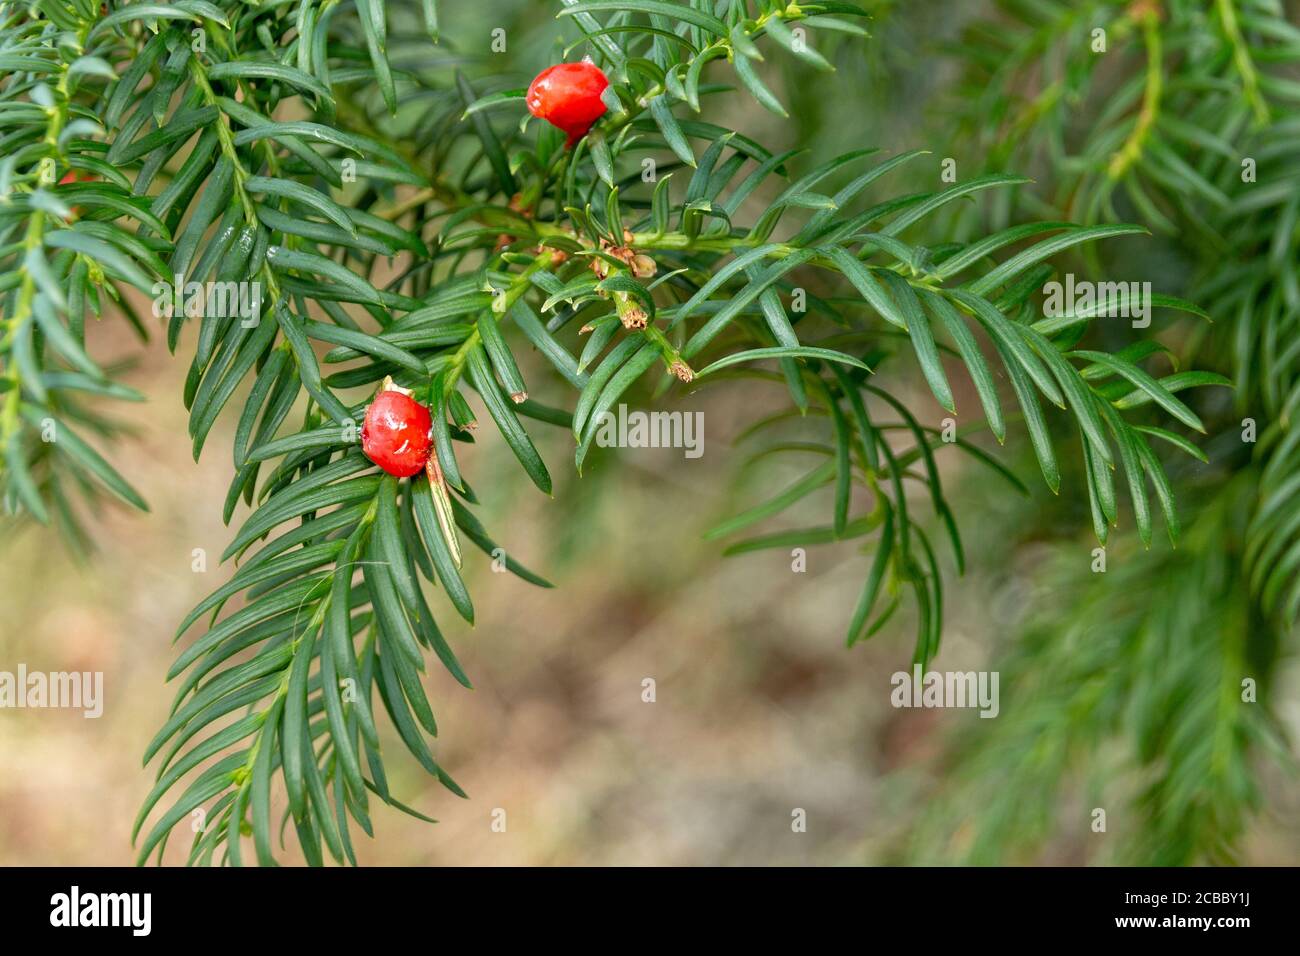 a close up view of small red berries of the canada yew plant Stock Photo